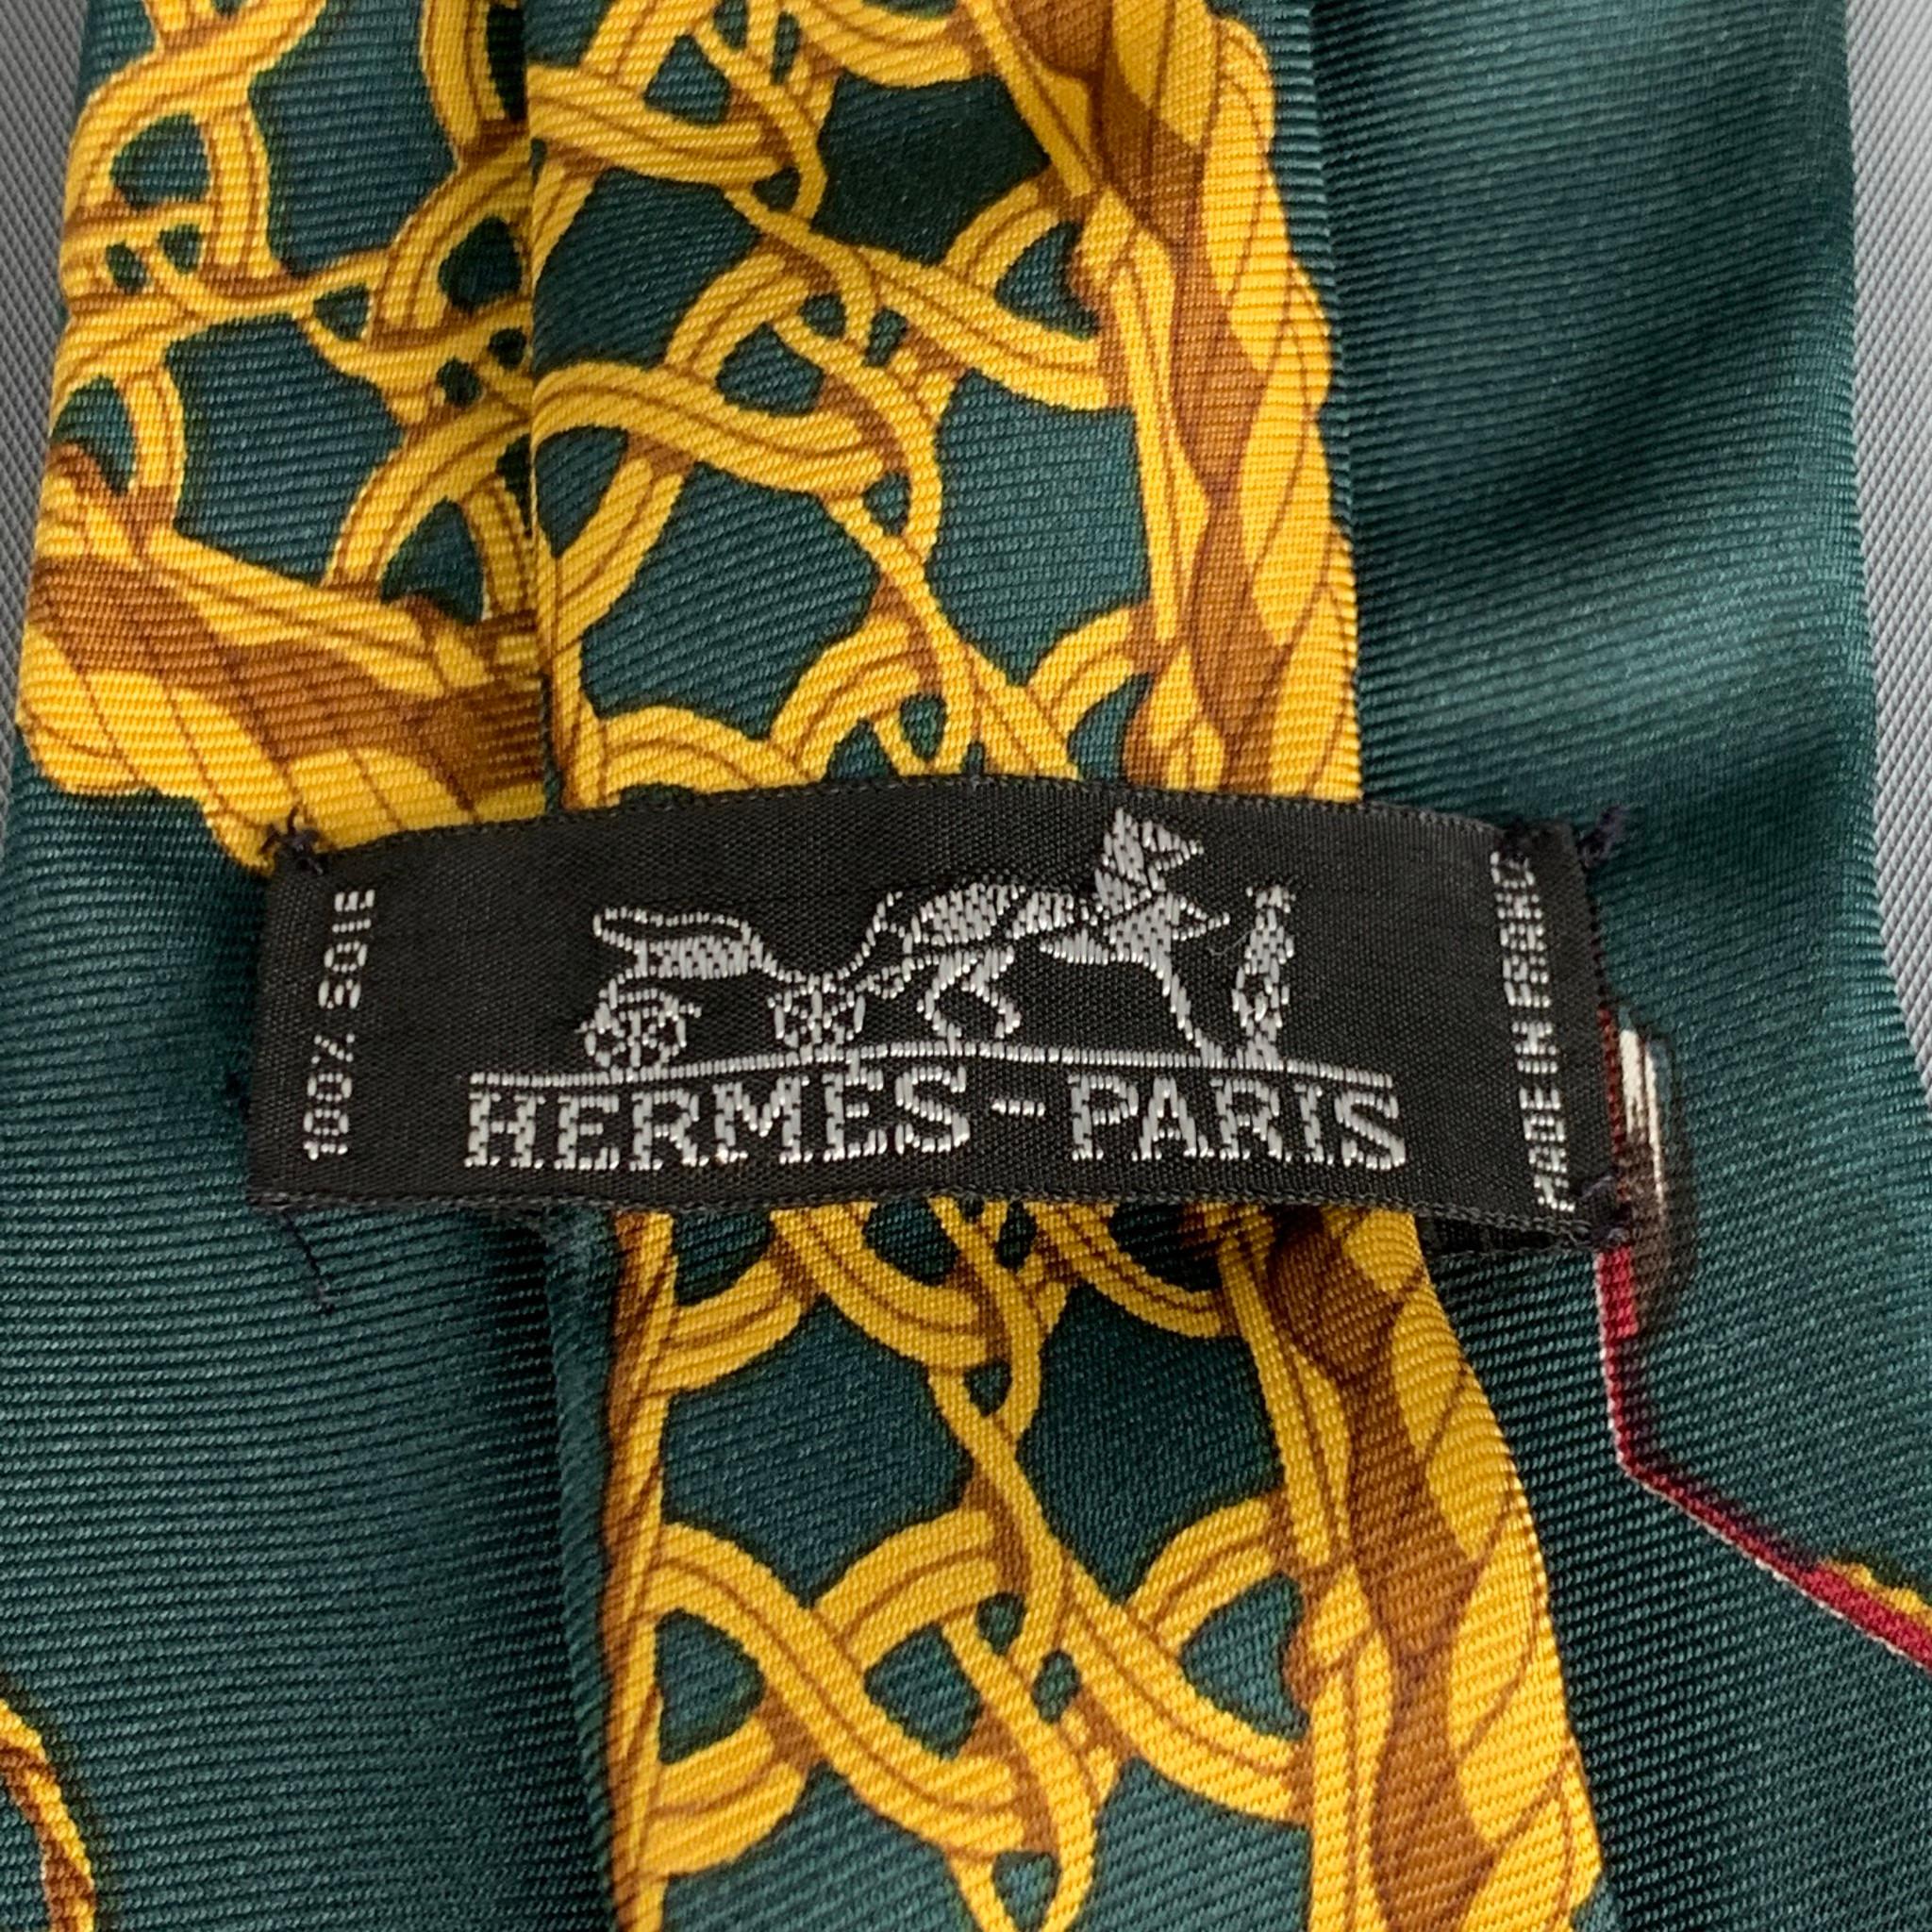 green and gold ties